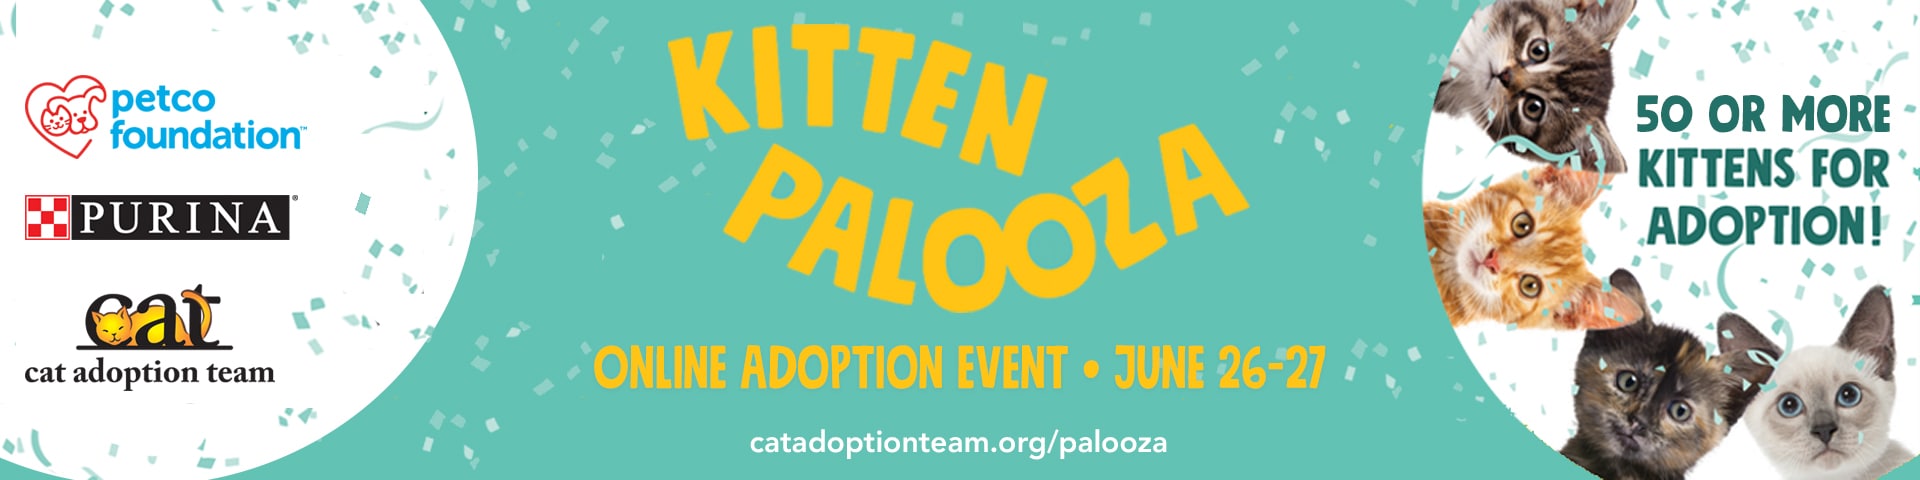 Kitten Palooza Online Adoption Event banner features confetti and, on the left logos from CAT, Petco Foundation, and Purina. On the right side are four images of kittens in a white circle.